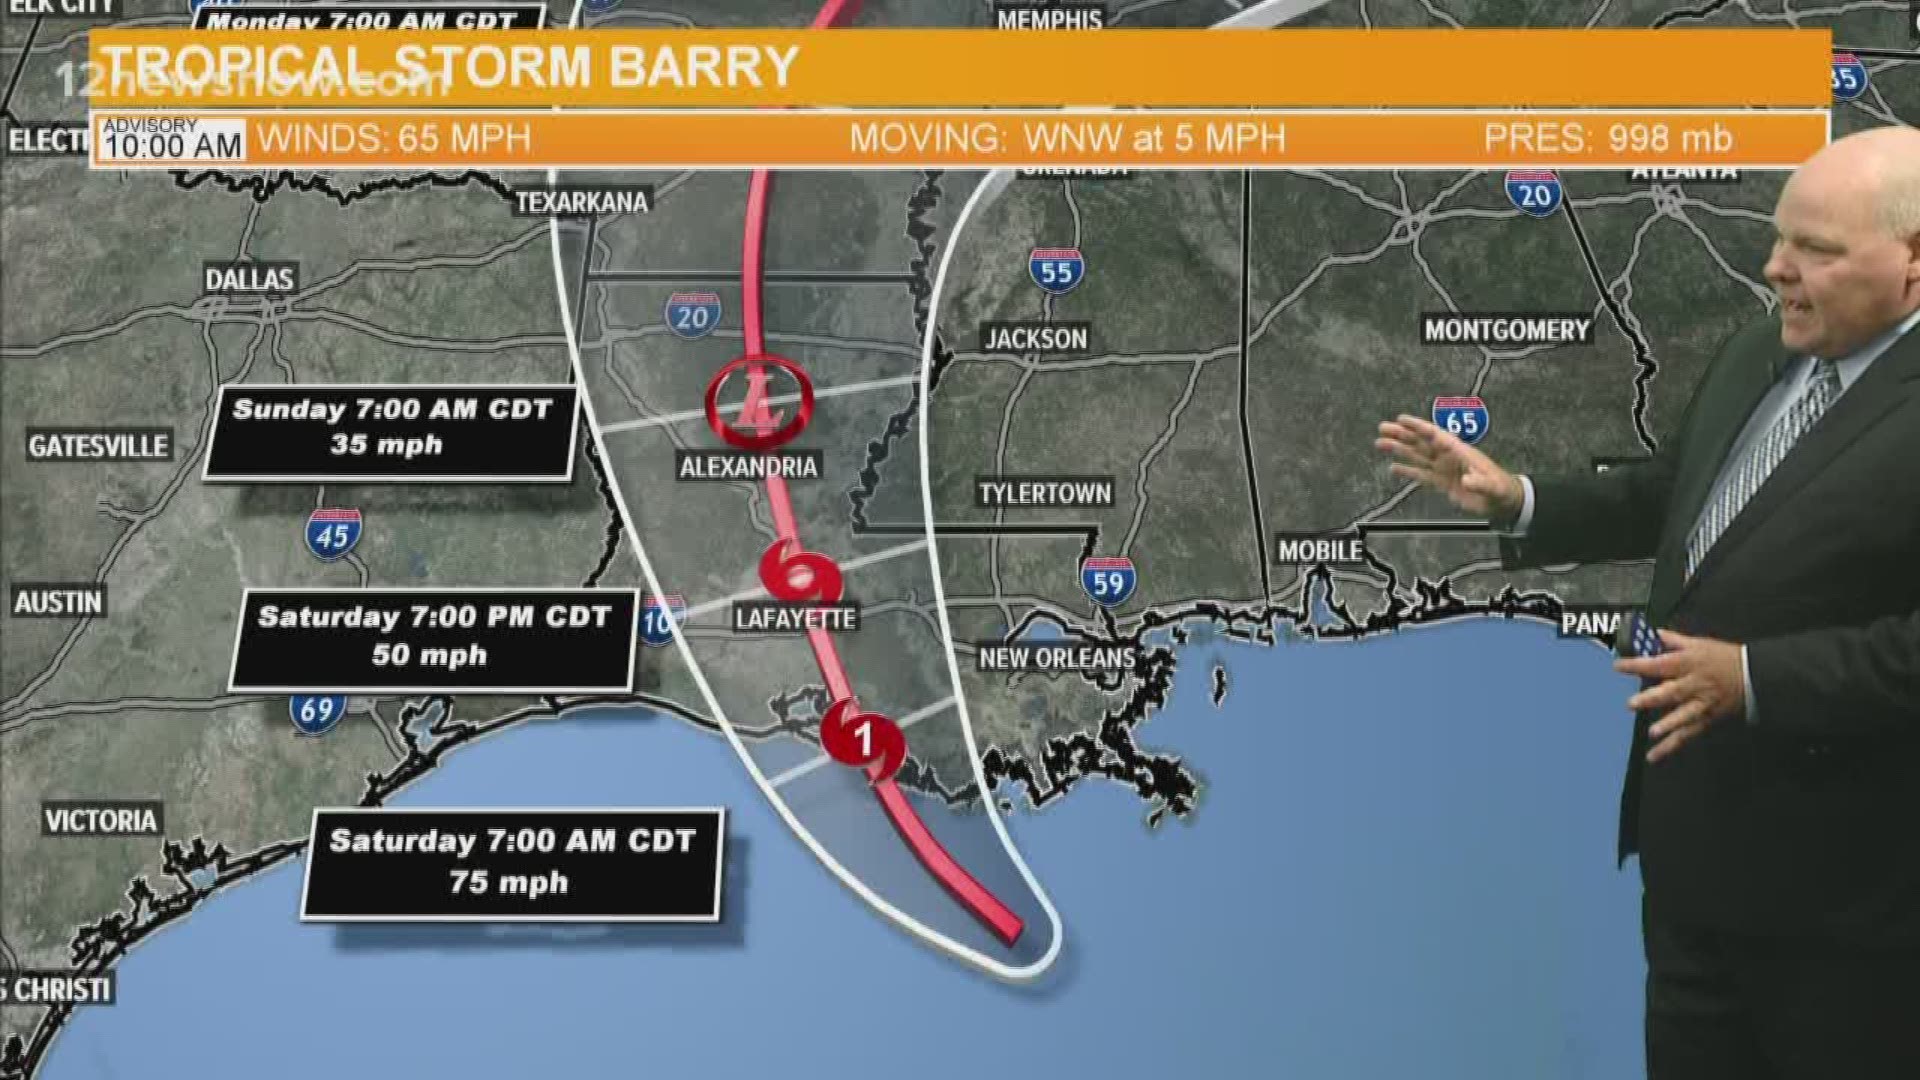 Tropical Storm Barry is now expected to make landfall around 7 a.m. Saturday morning along the Louisiana coastline as a category one hurricane according to the National Hurricane Center's latest update. The 10 am update on Tropical Storm Barry from the National Hurricane Center reported Barry's winds are sustained at 65 mph.